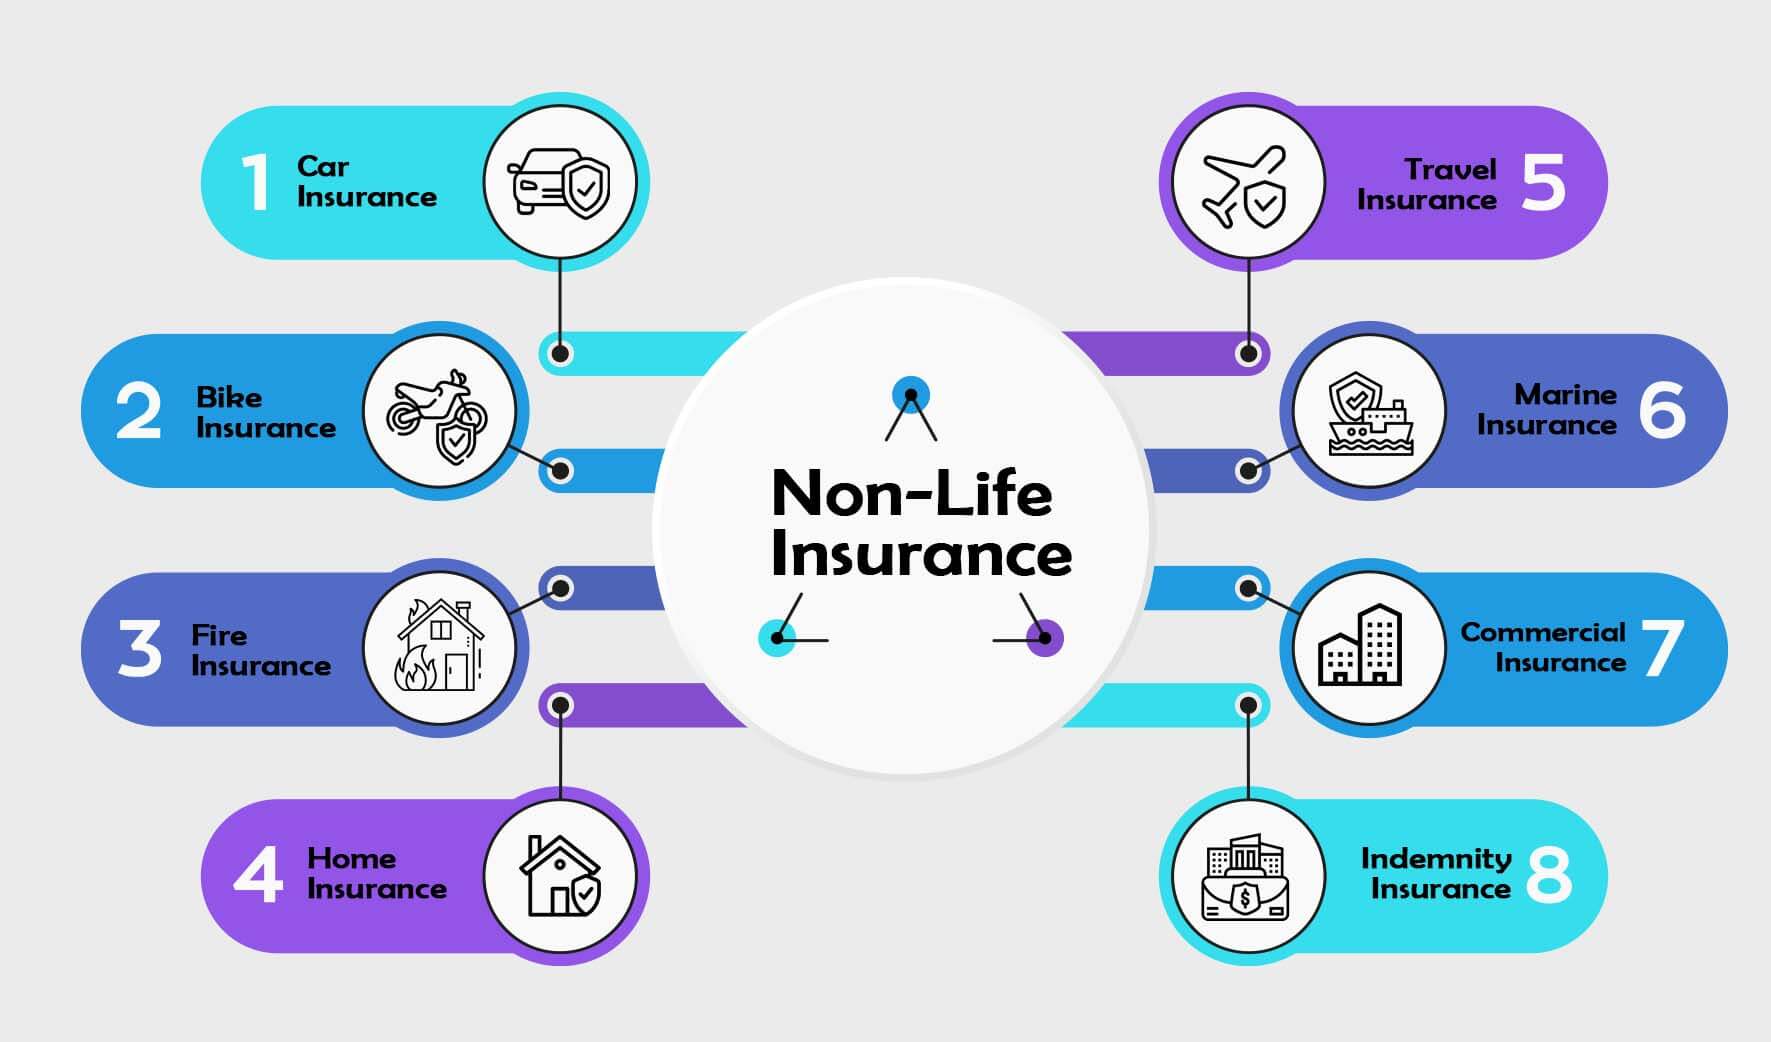 Image of Non-Life Insurance Policy